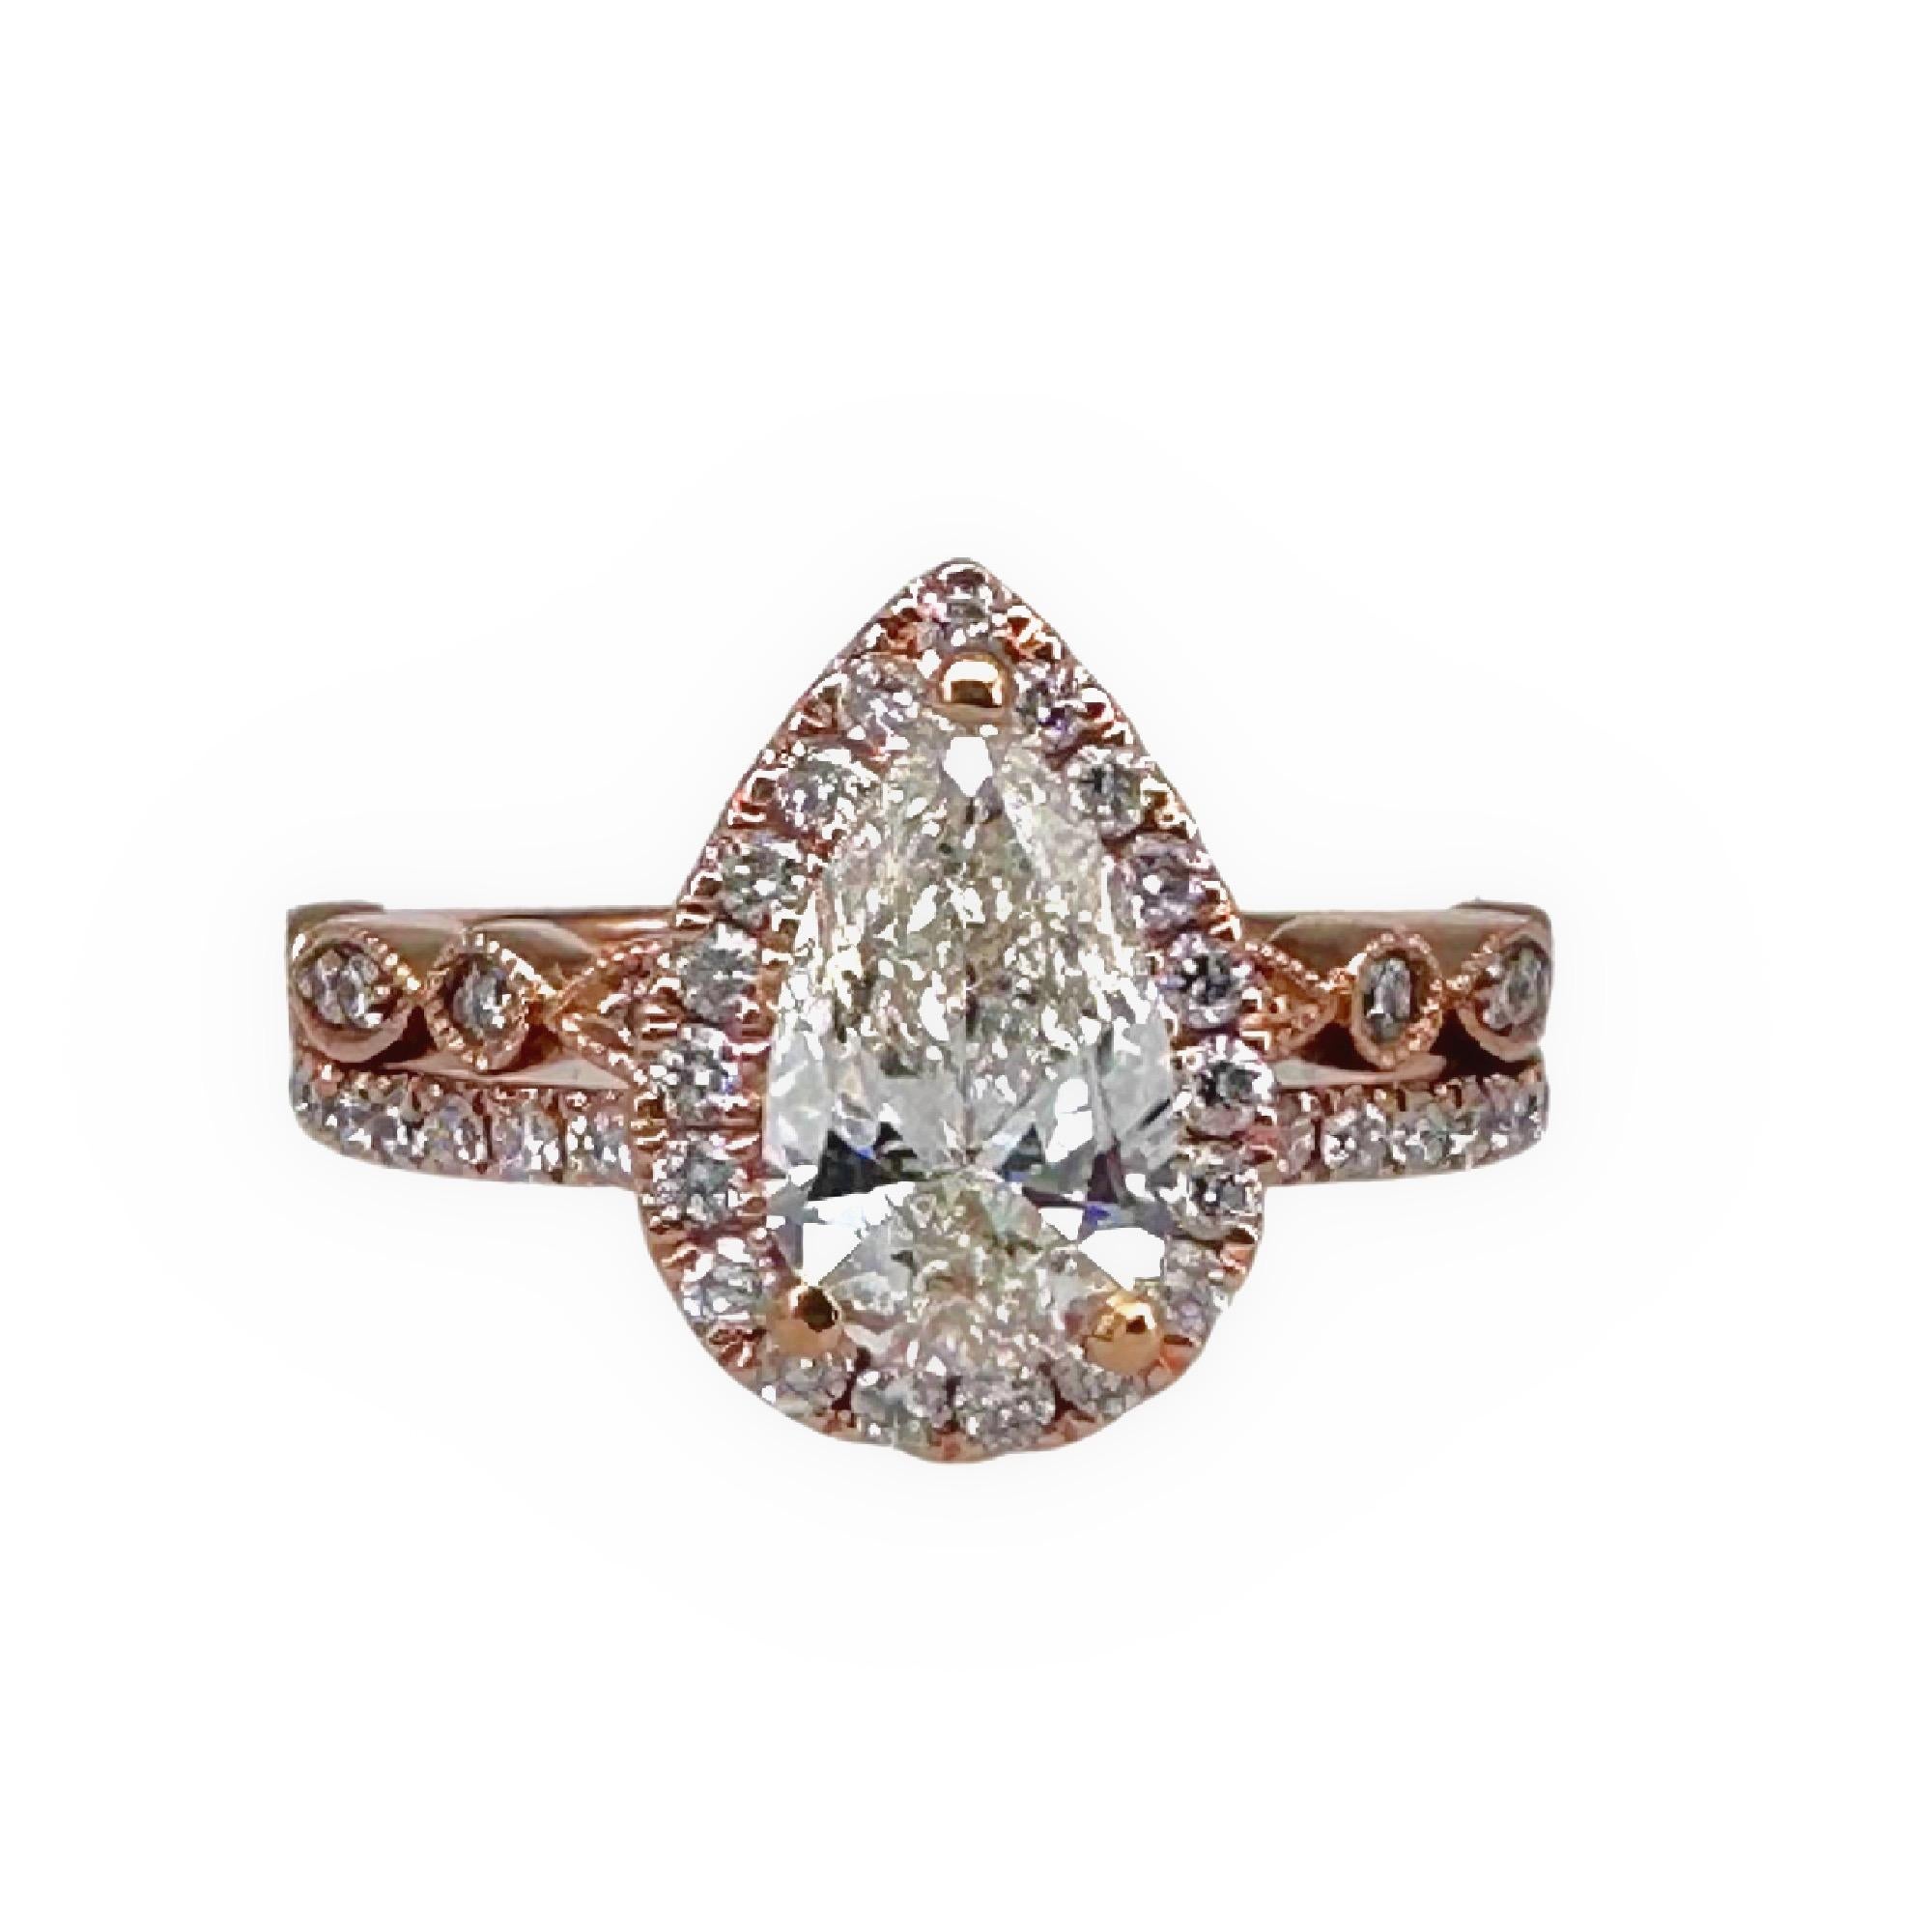 Robins Brothers Signature Pear Diamond 1.375tcw 14k Rose Gold Engagement Ring For Sale 1